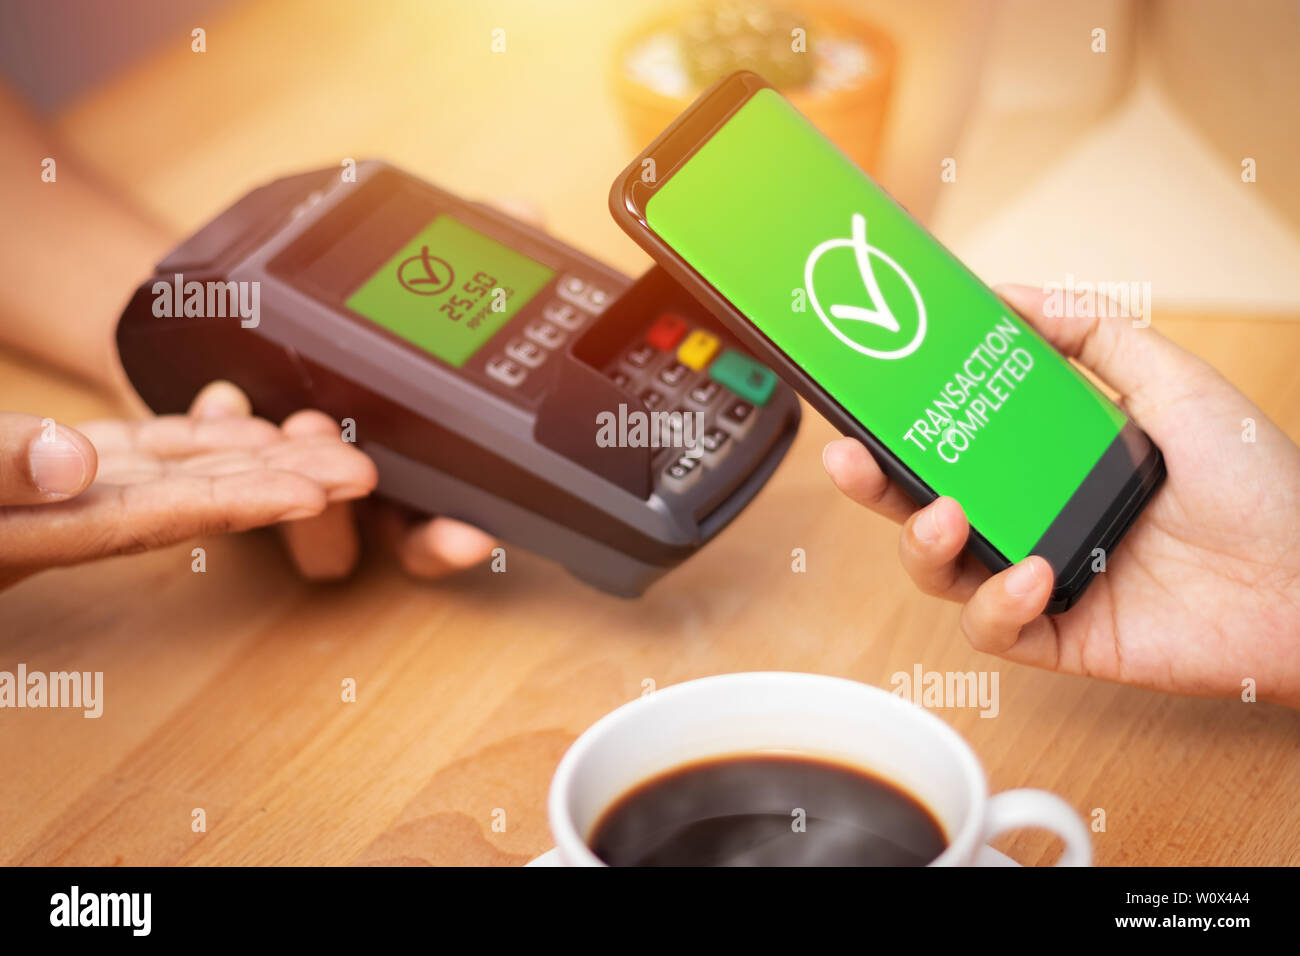 cashless Society, customer paying bill through smartphone using NFC technology at point of sale terminal in cafe. mobile digital wallet technology con Stock Photo